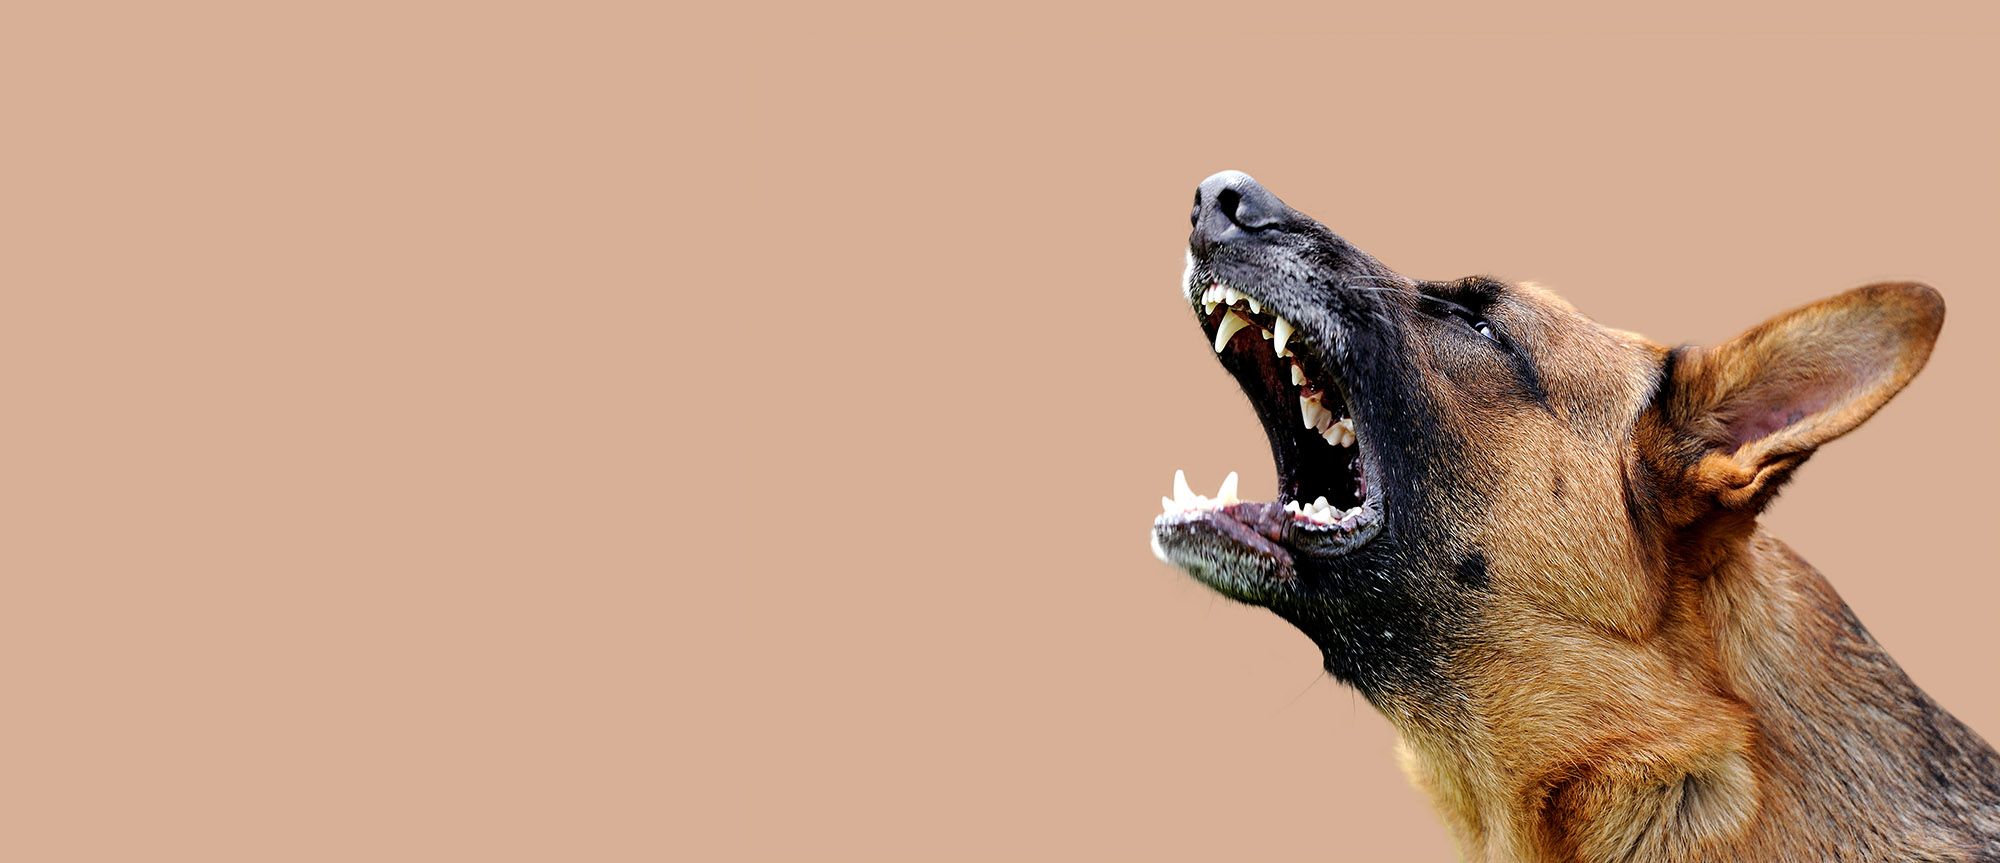 dangerous dog bite attack personal injury solicitors Leeds